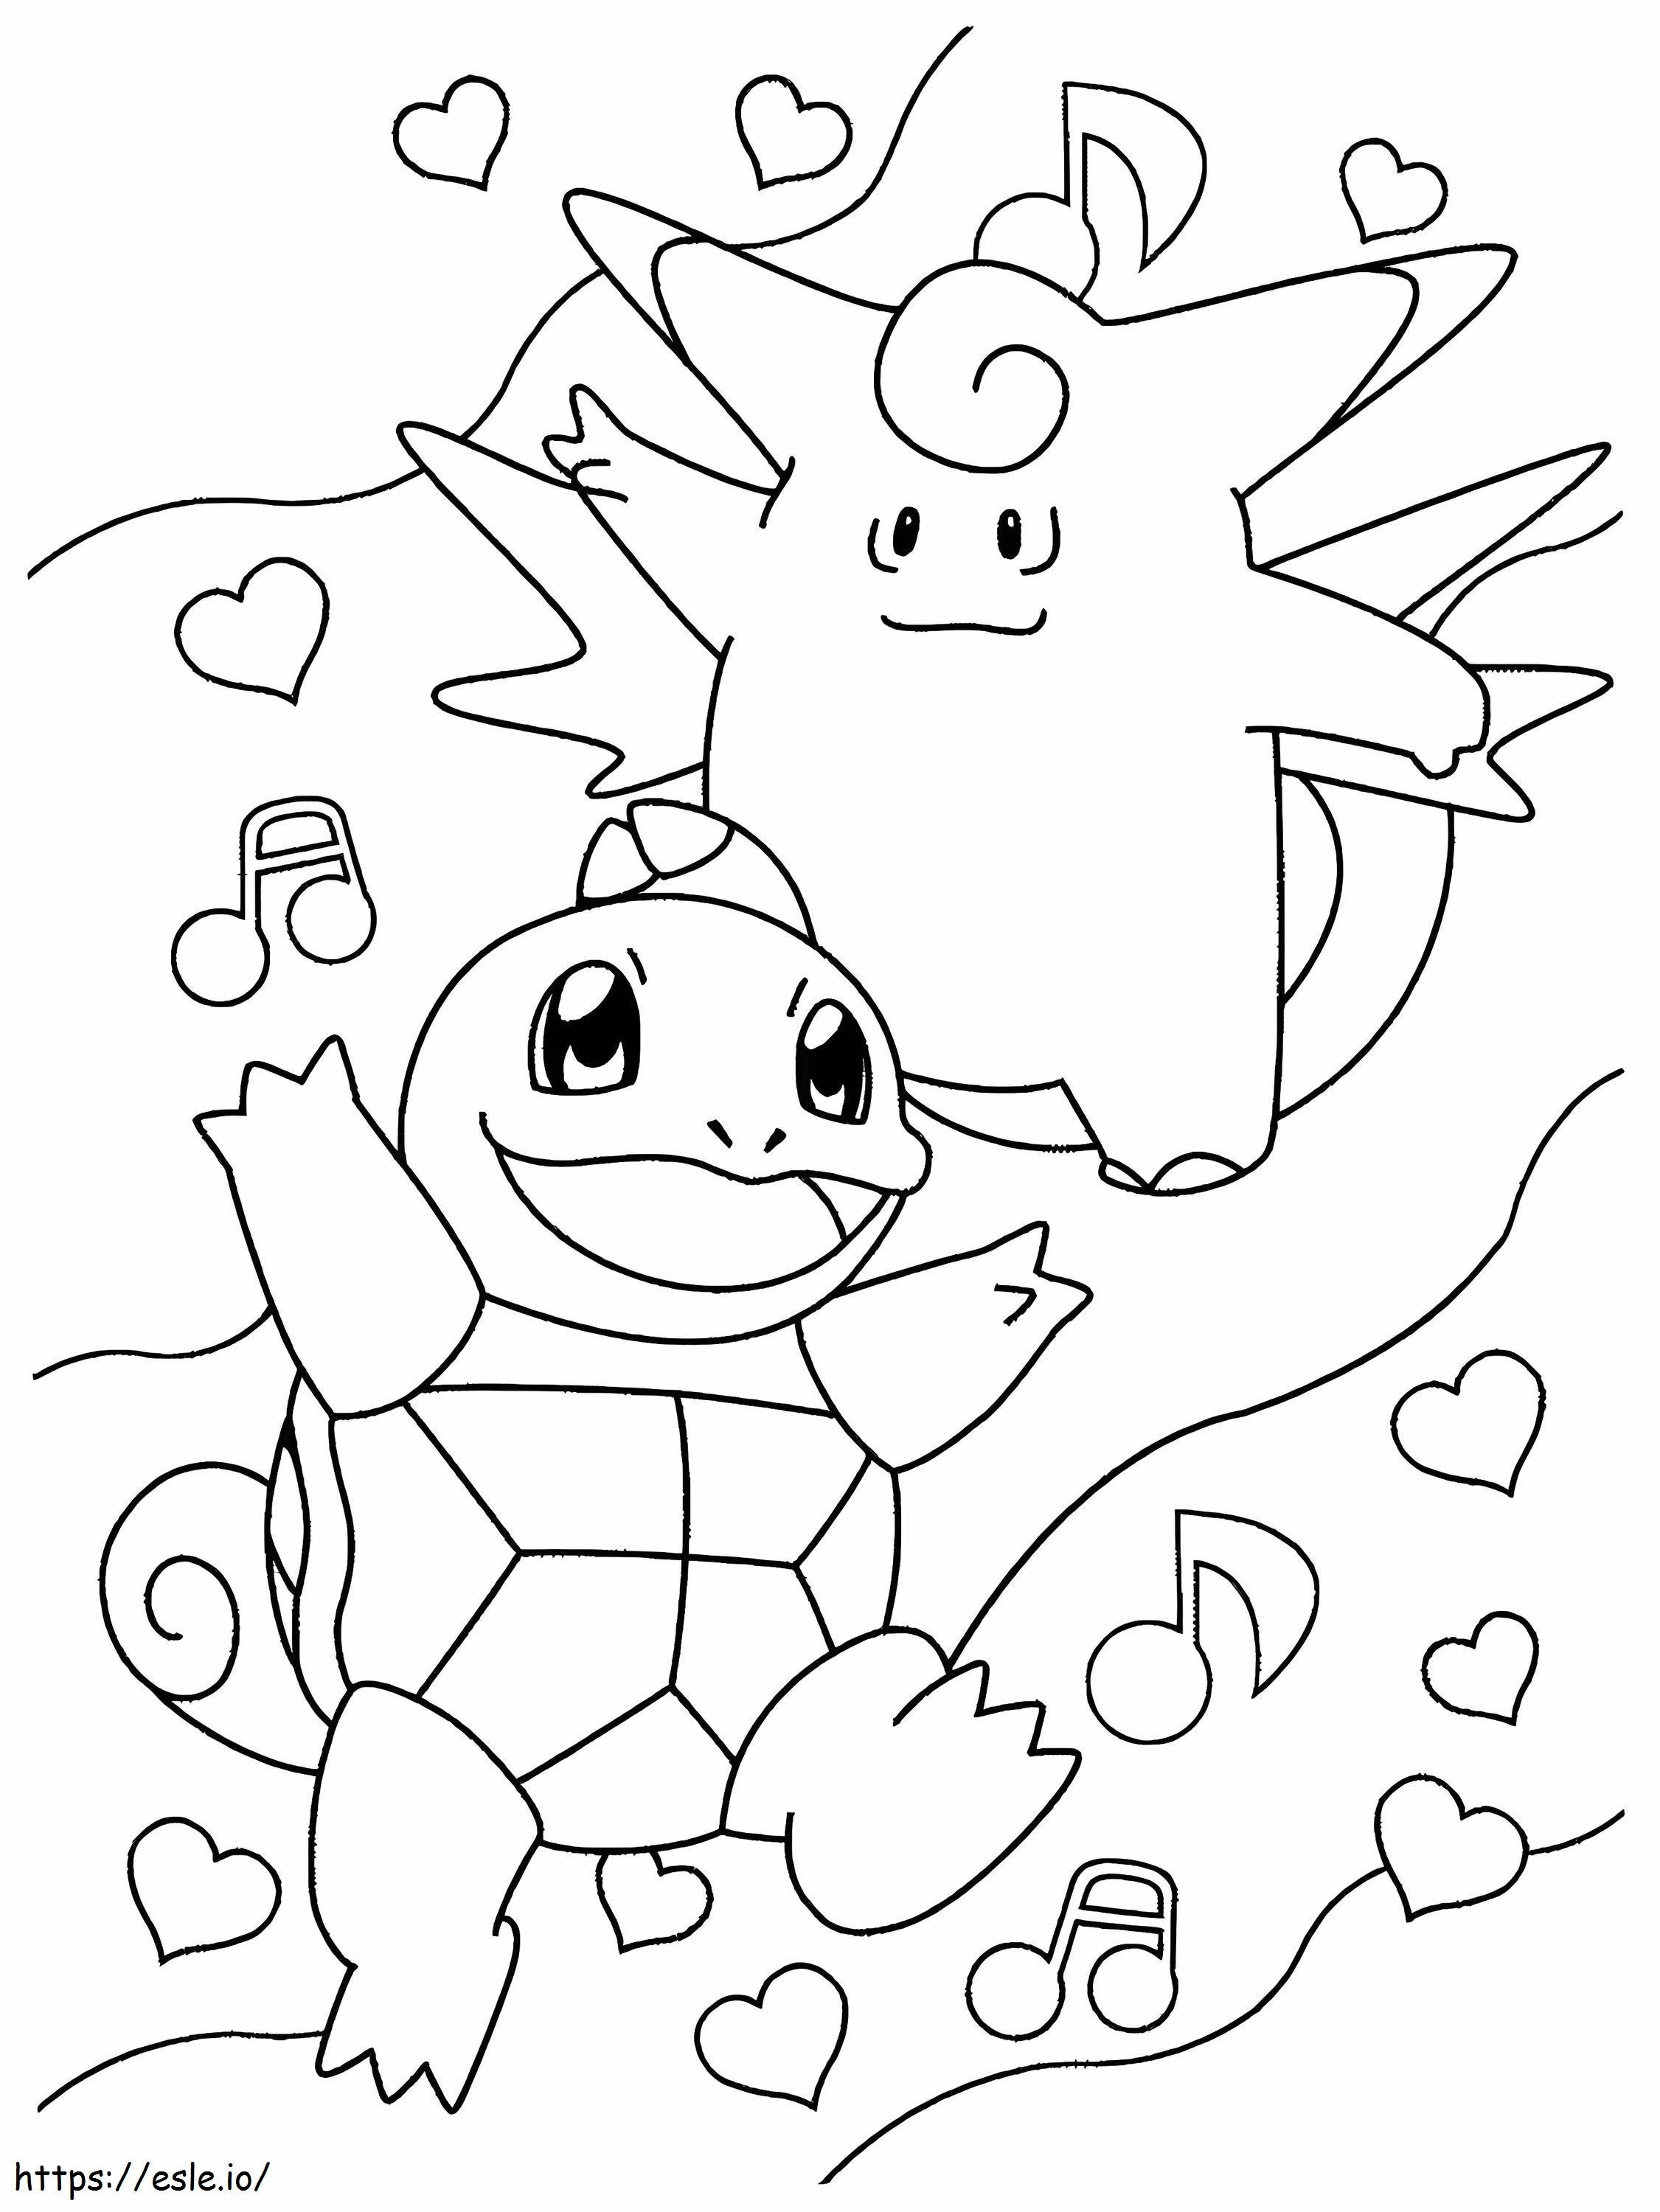 111 coloring page